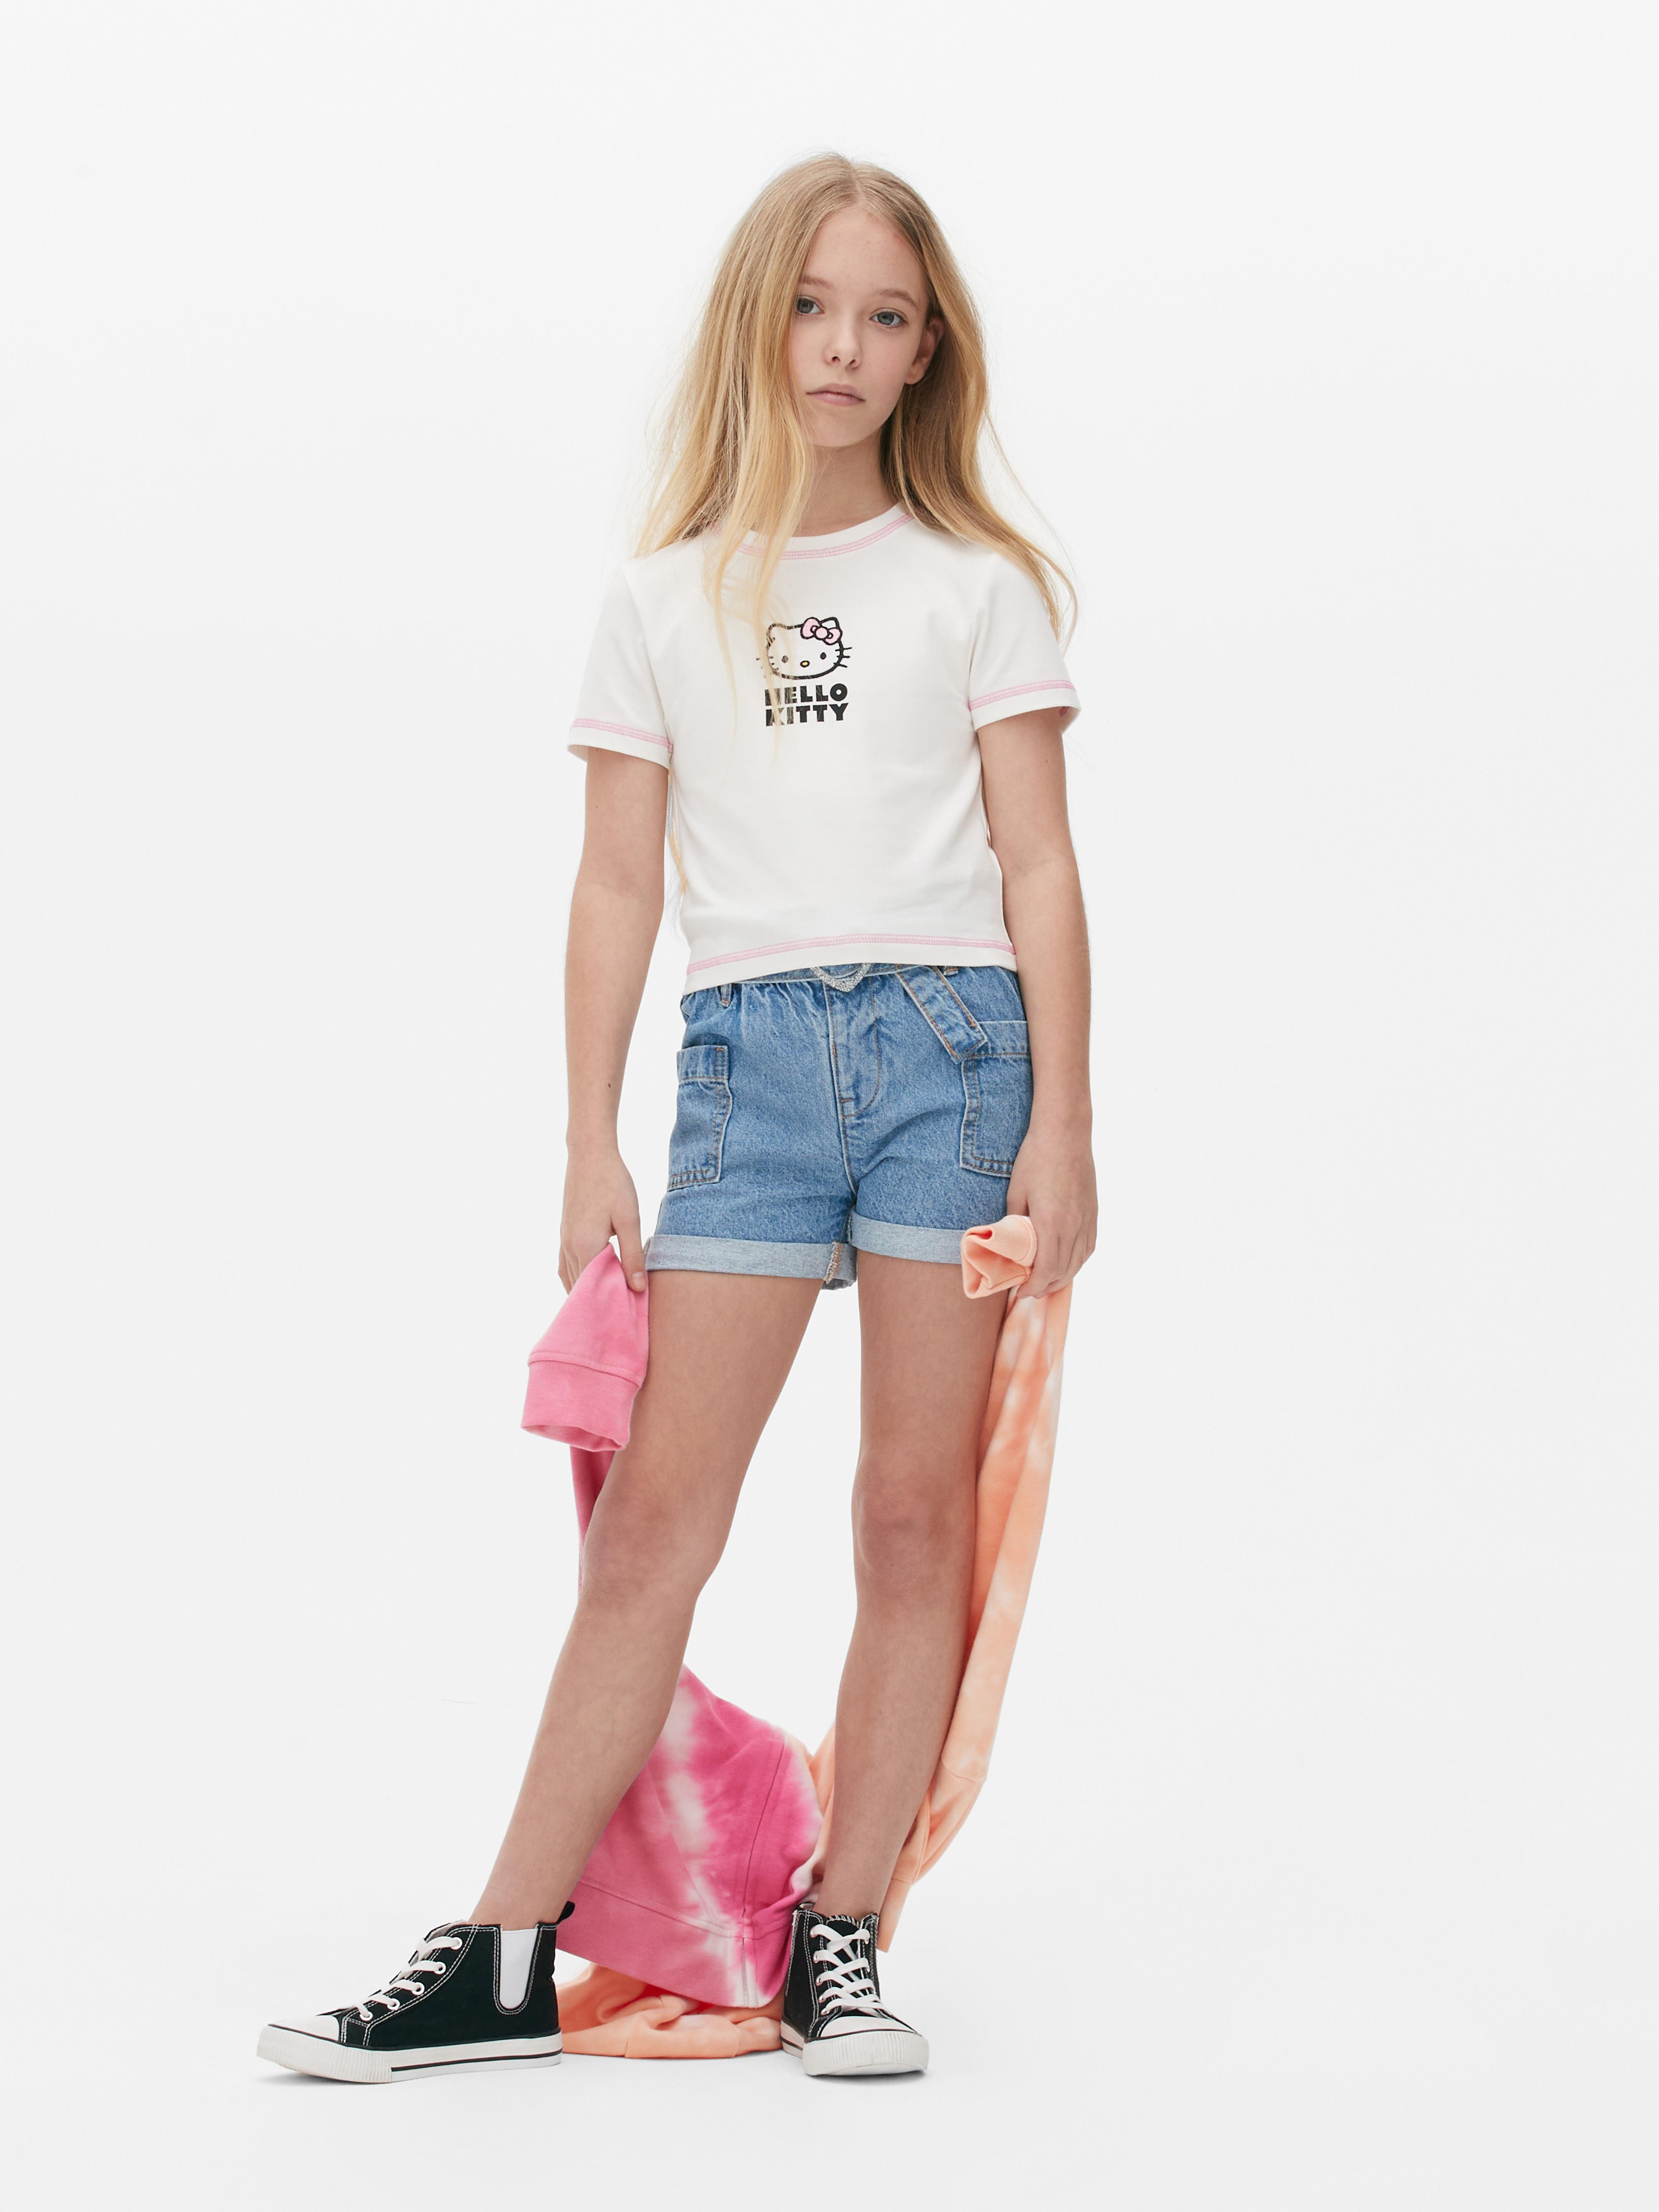 Little girl in a pure white t-shirt for advertising and shorts